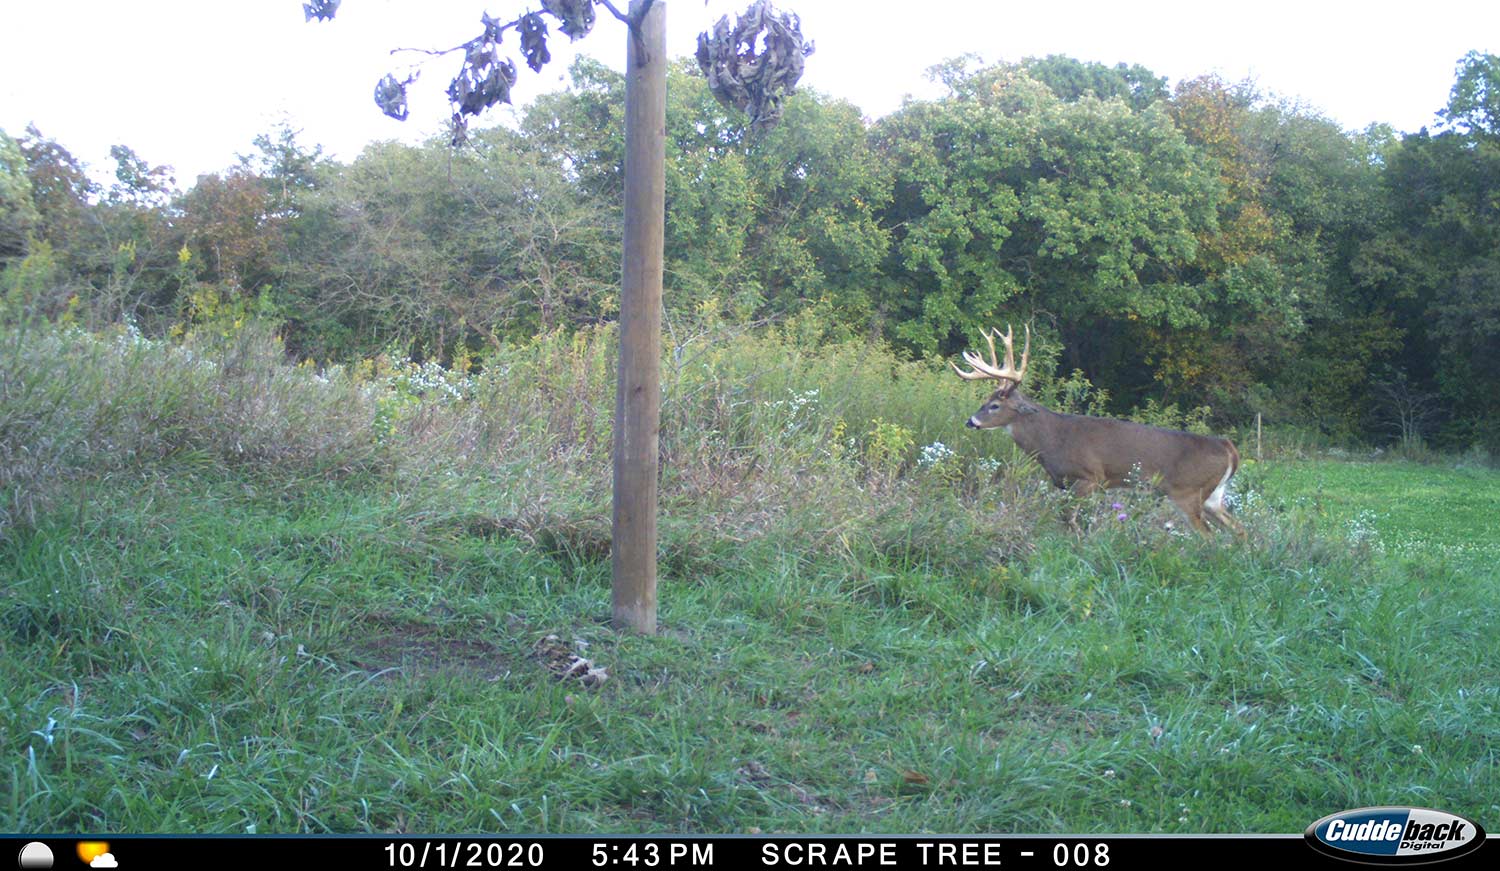 Trail camera footage of a deer in a food plot.